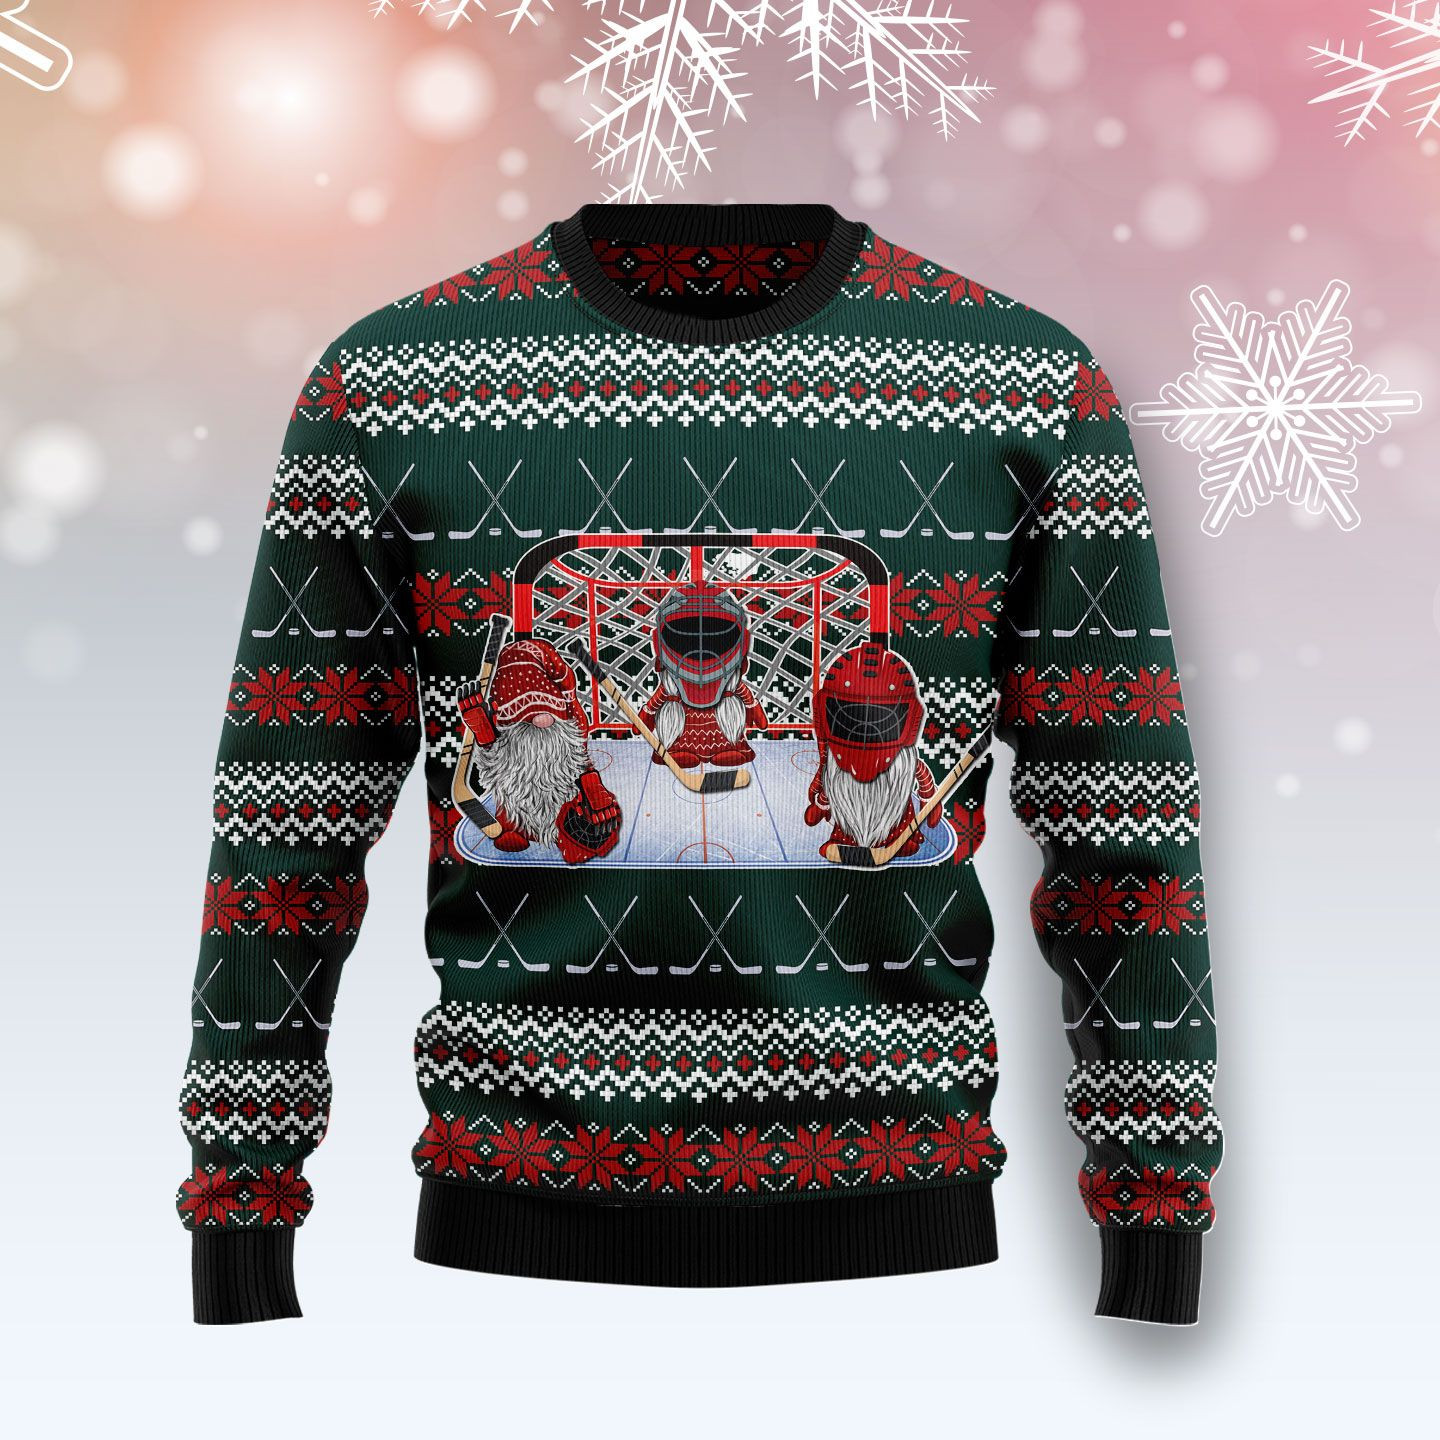 Hockey Gomies Ugly Christmas Sweater Ugly Sweater For Men Women, Holiday Sweater